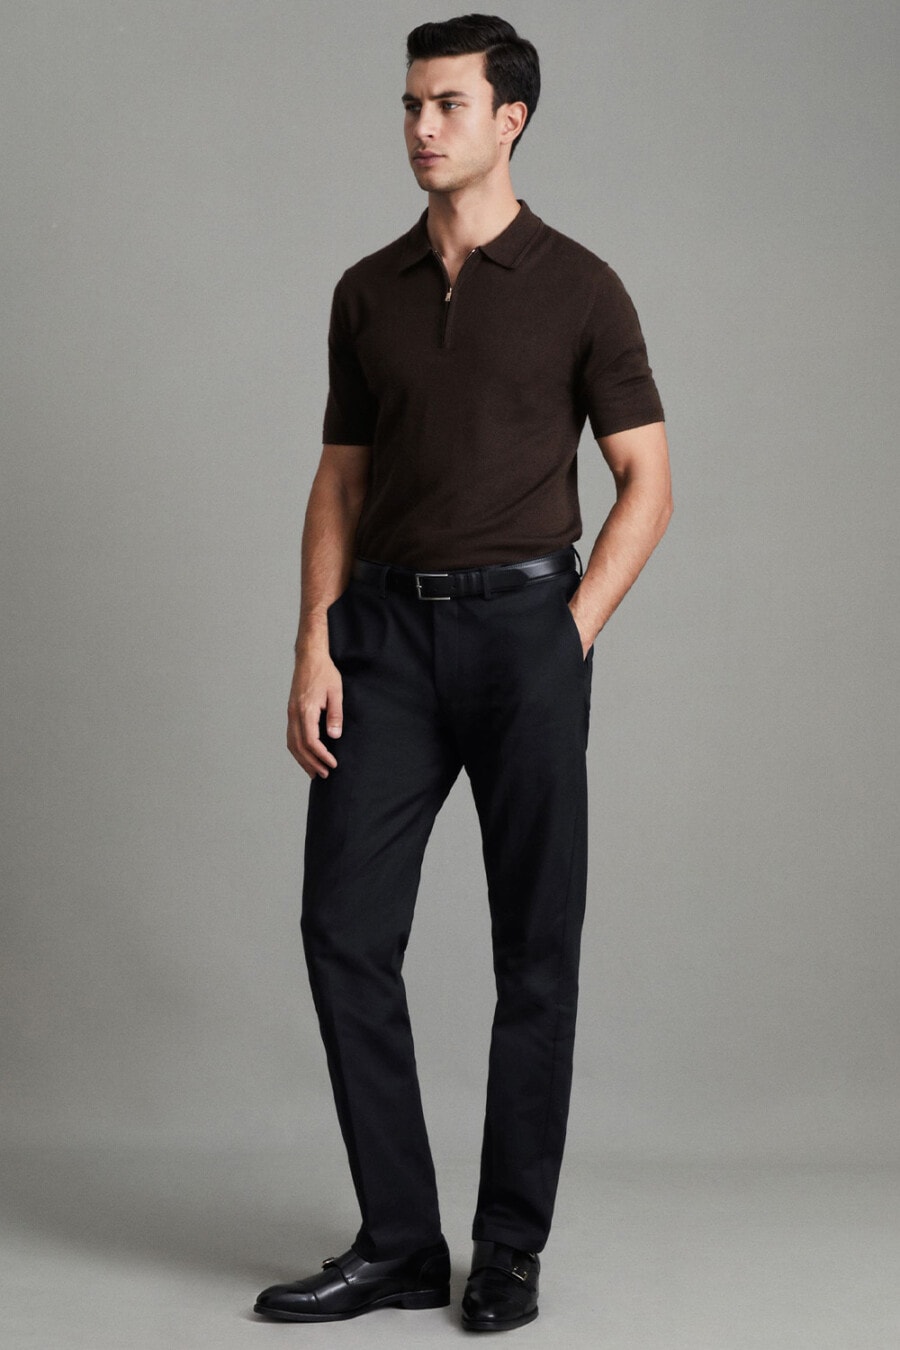 Black Polo with Tan Pants Outfits For Men (34 ideas & outfits)